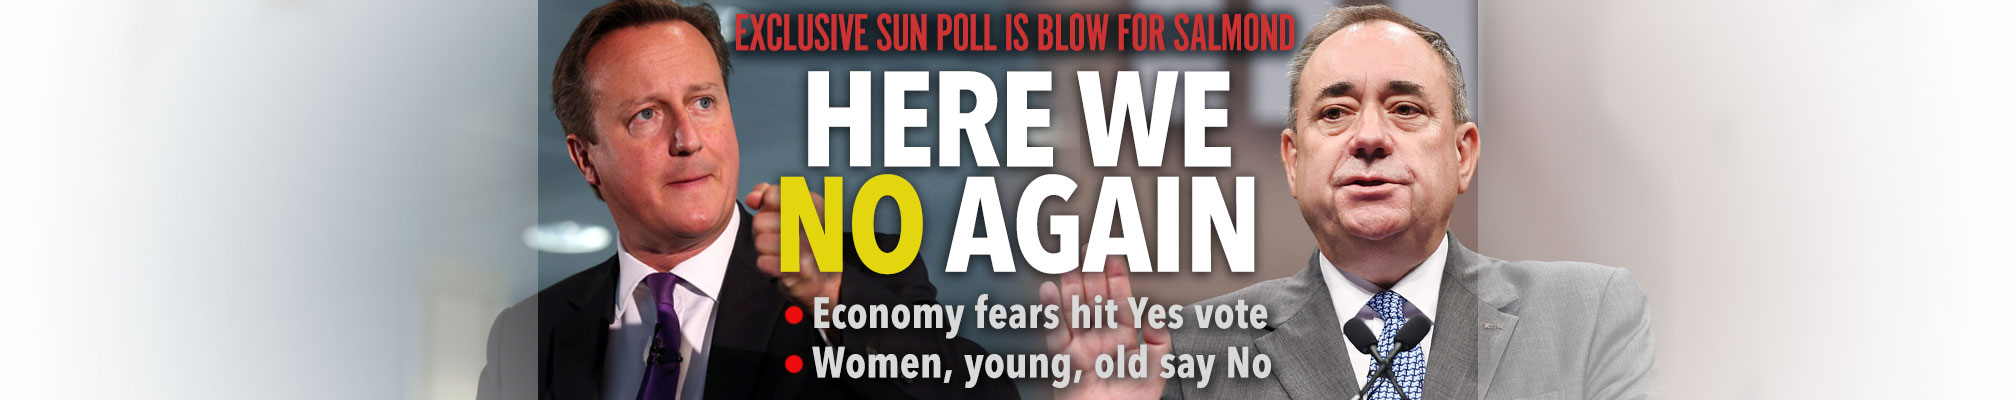 Here we No again - Sun poll blow for Alex